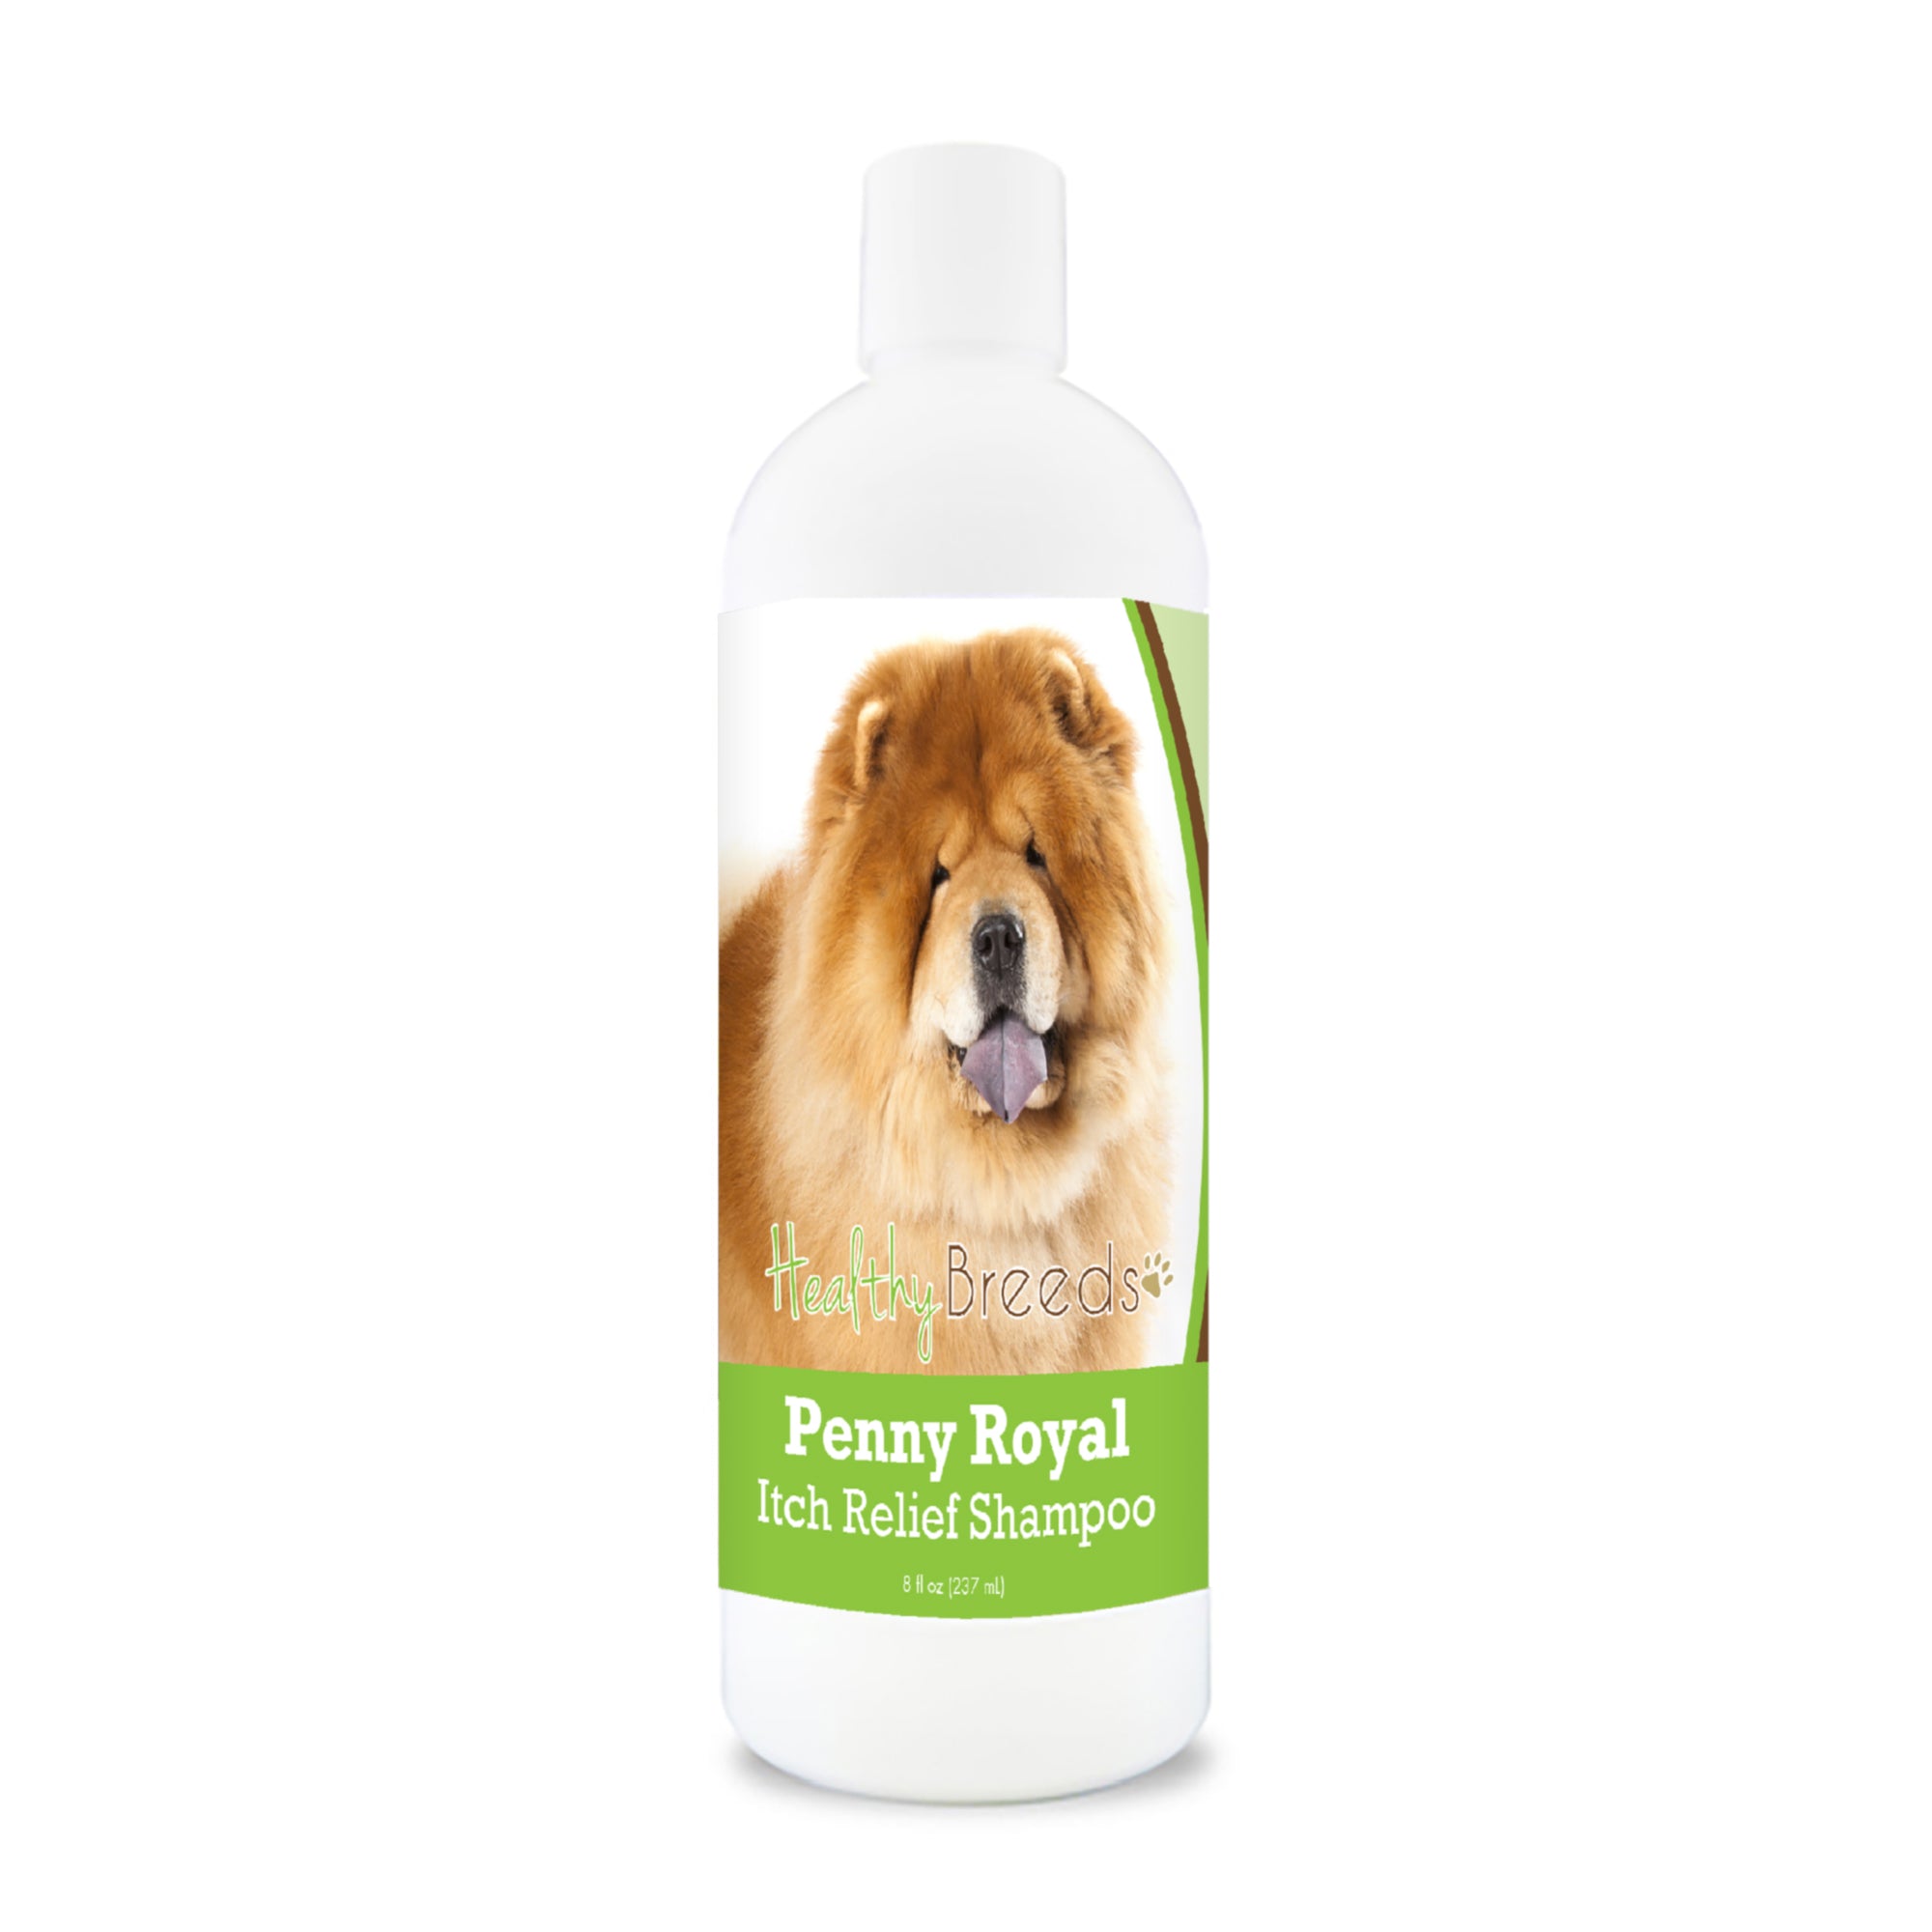 Chow Chow Penny Royal Itch Relief Shampoo 8 oz